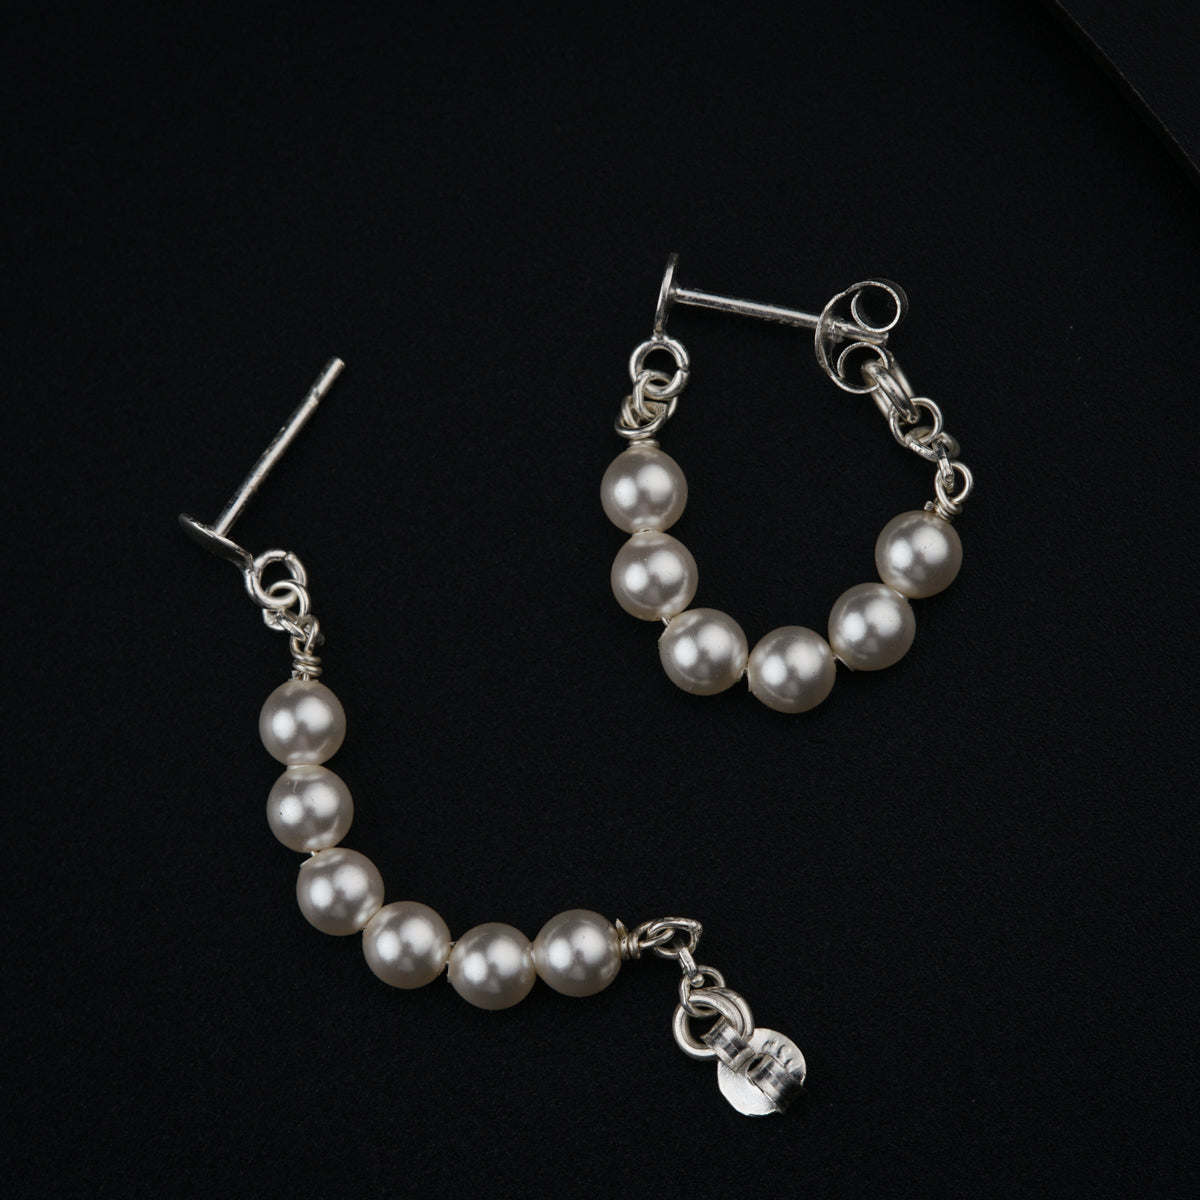 a pair of earrings with pearls on a black background